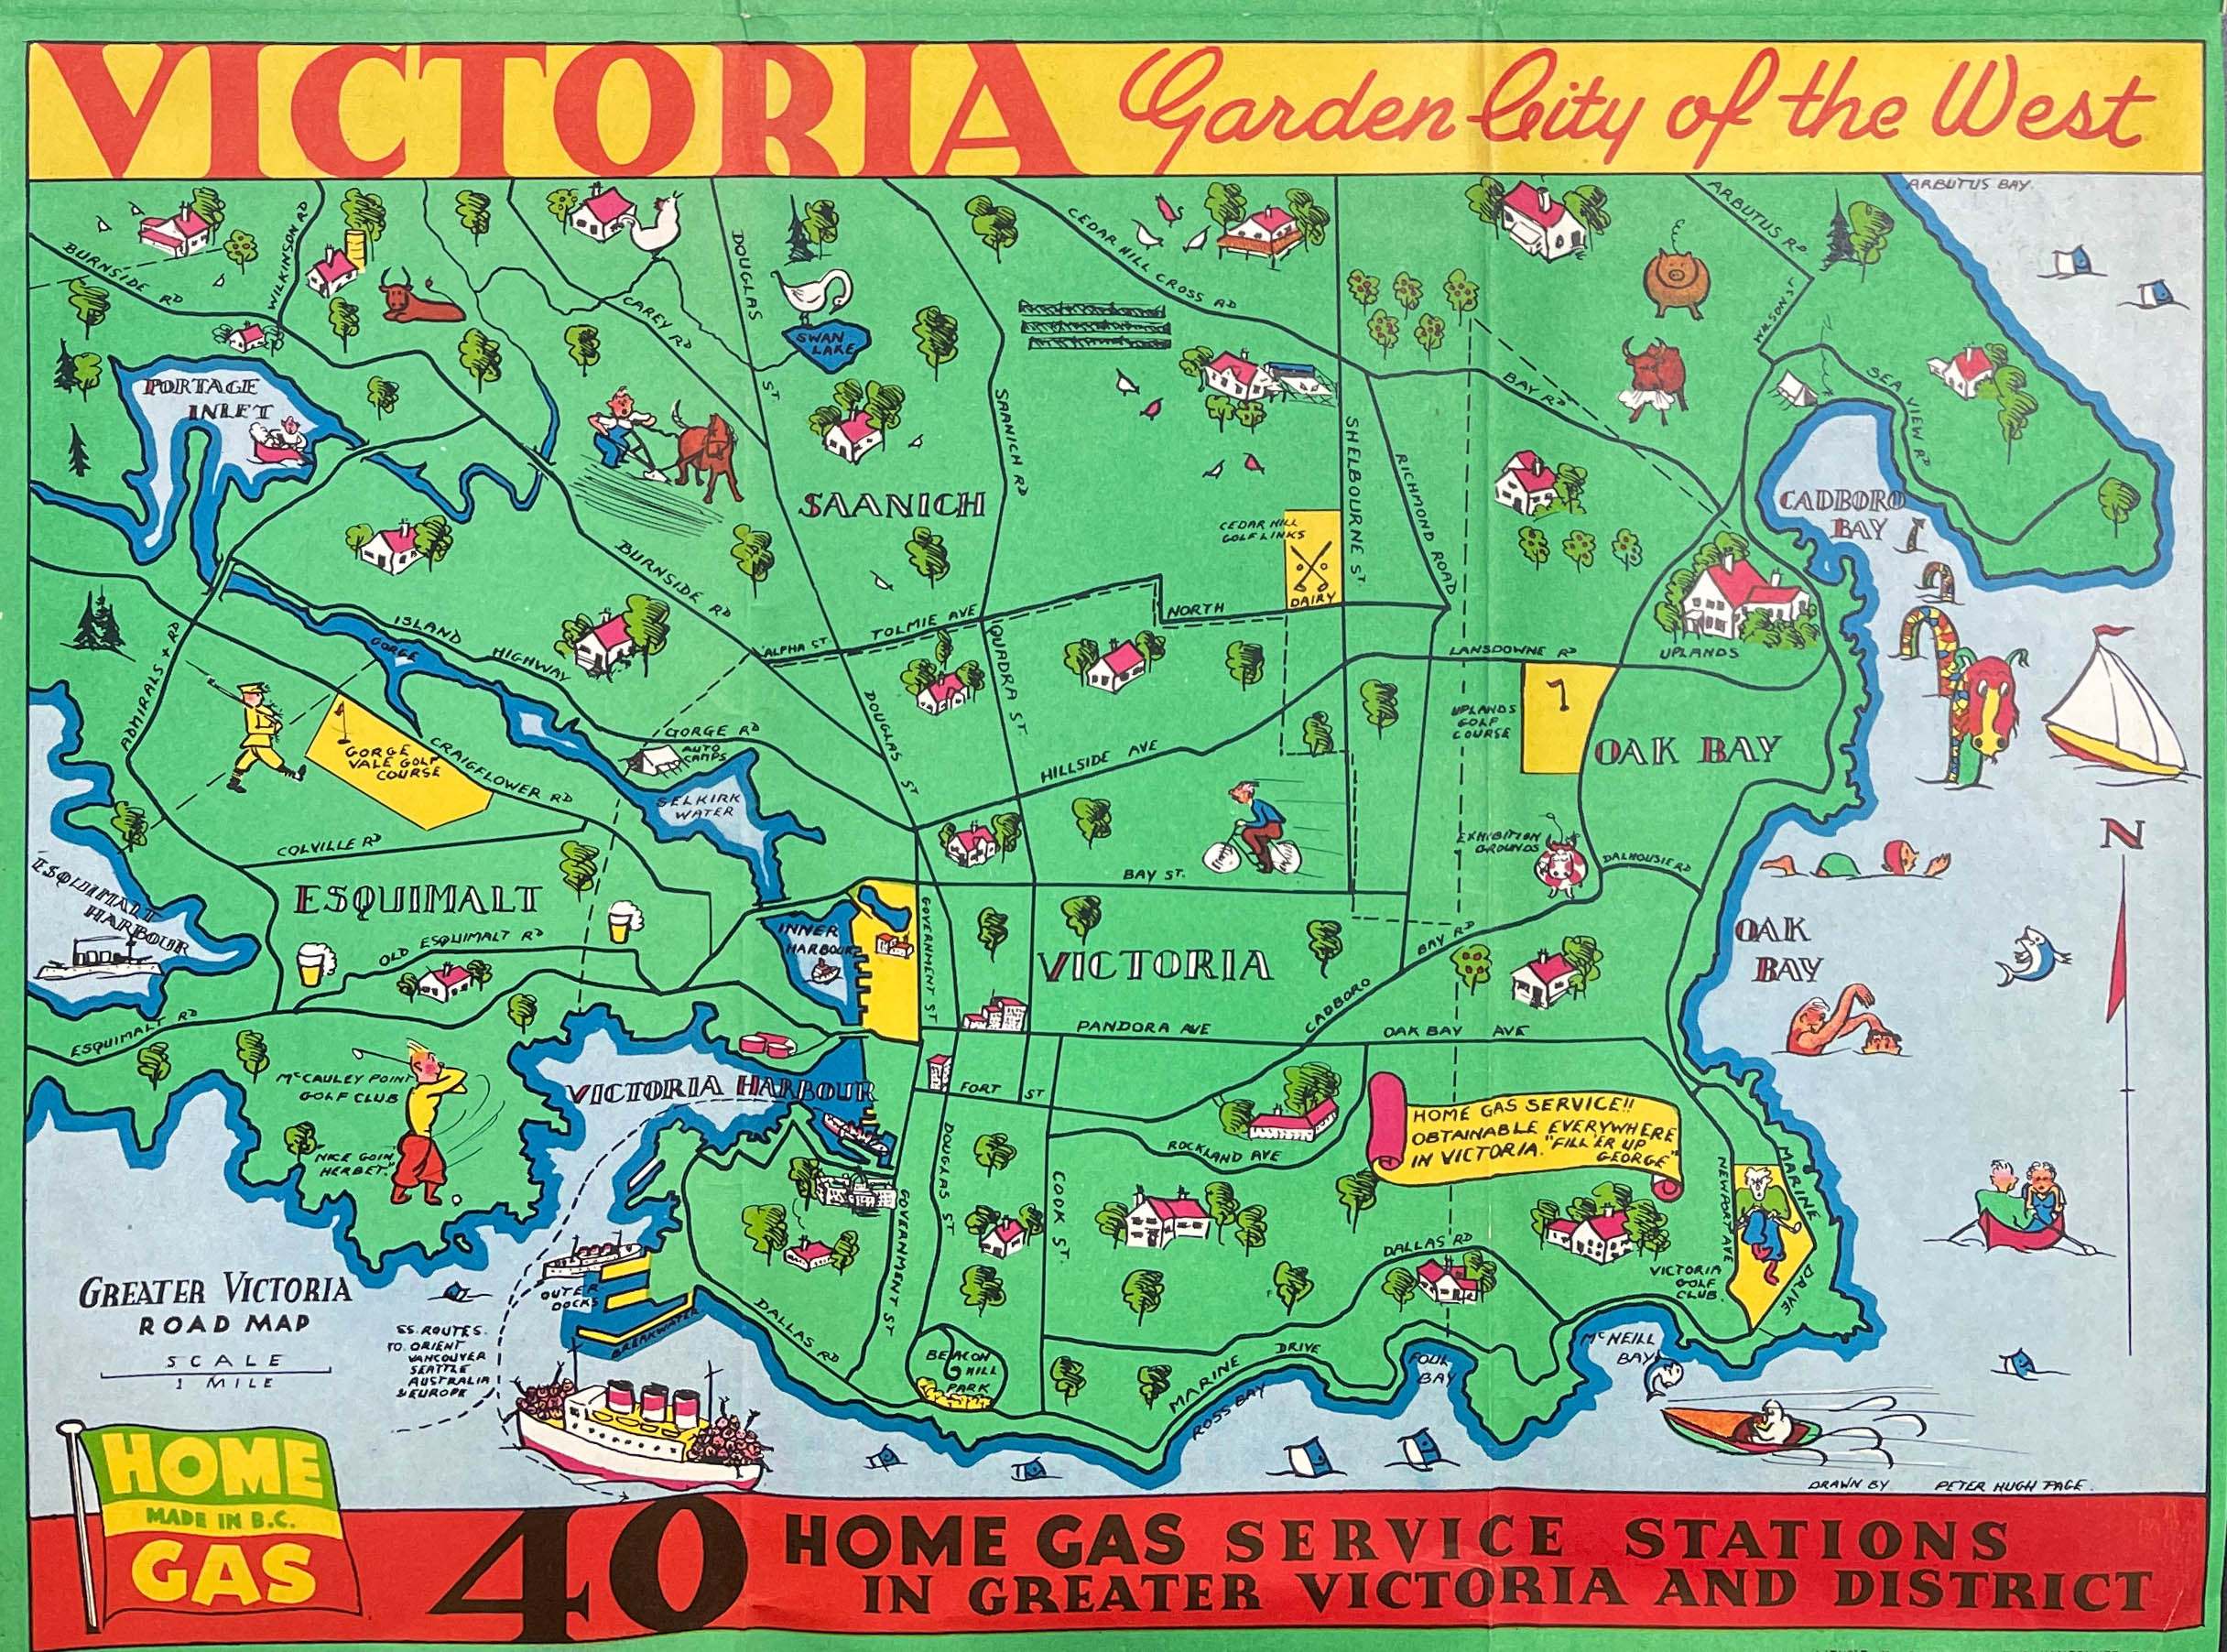 Hugh Page pictorial map of Victoria from 1936.